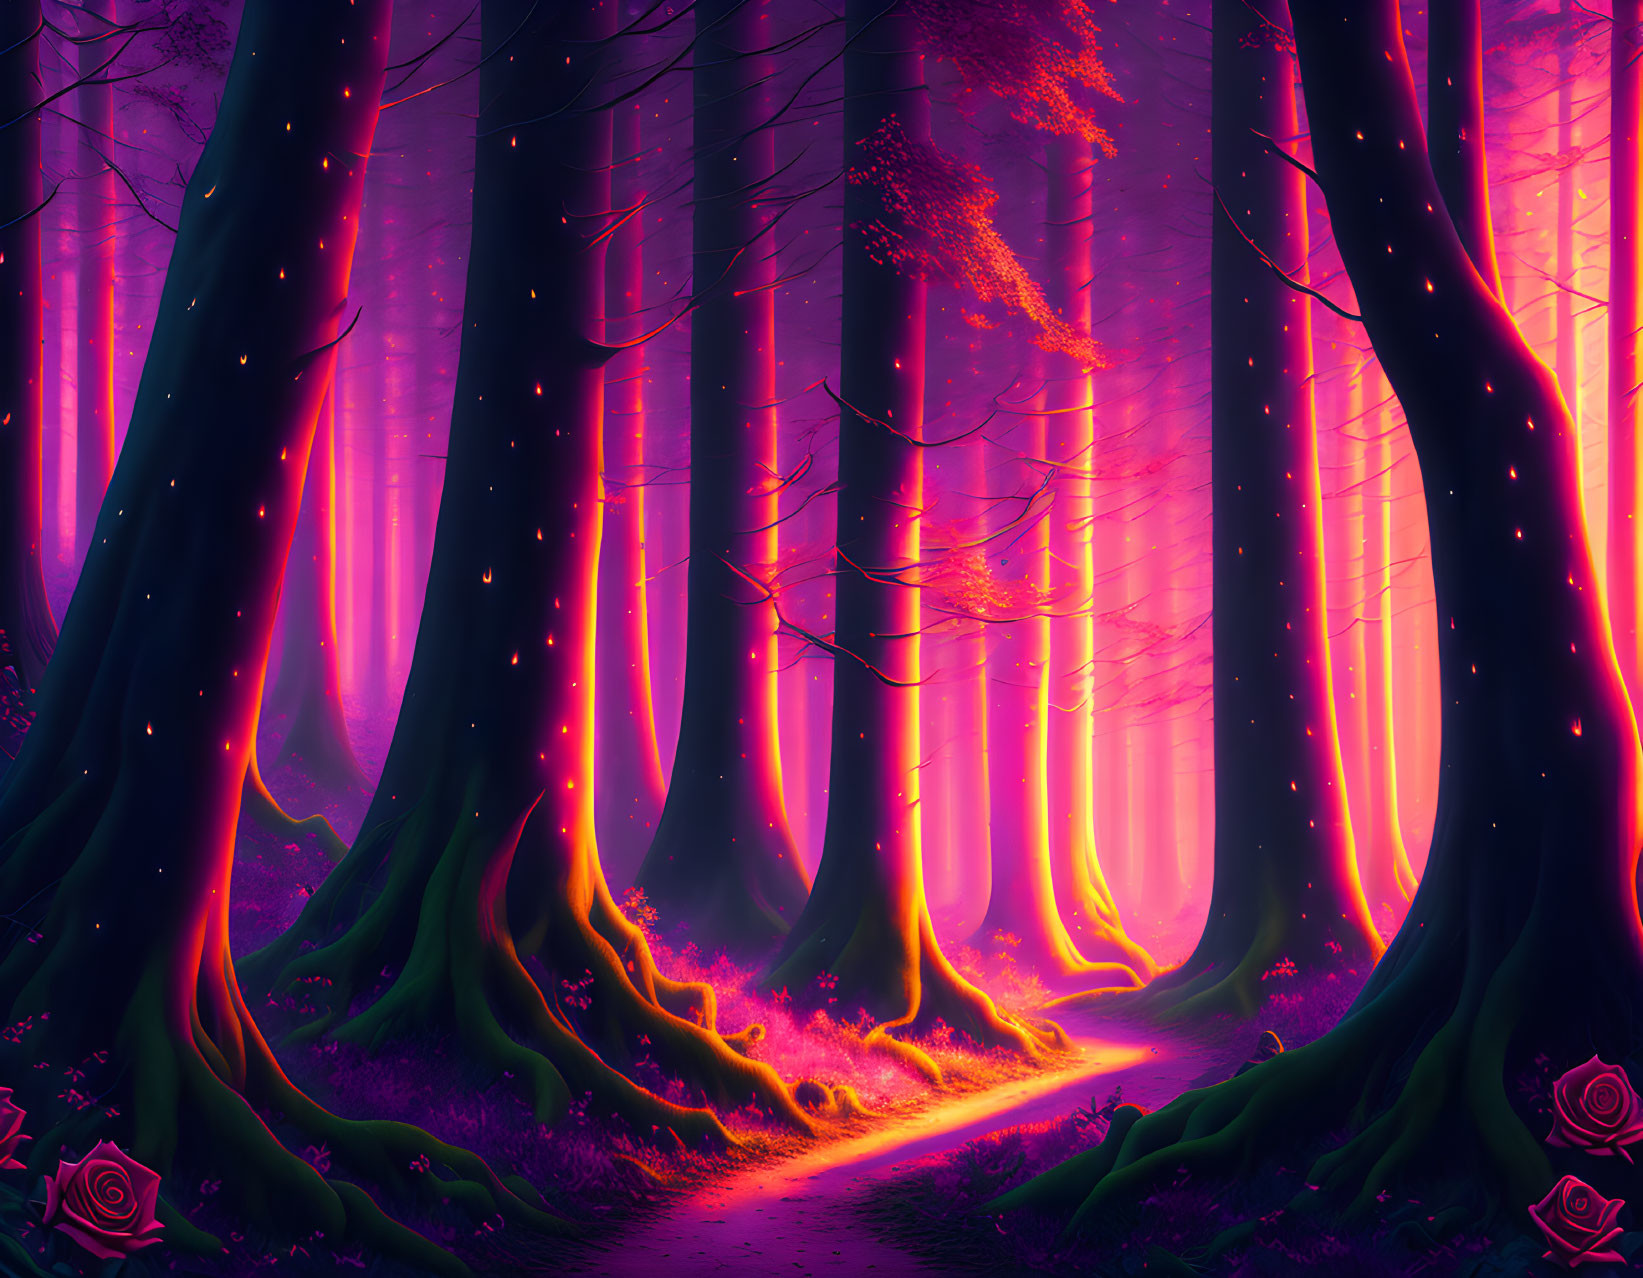 Enchanting Twilight Forest Scene with Purple and Pink Hues